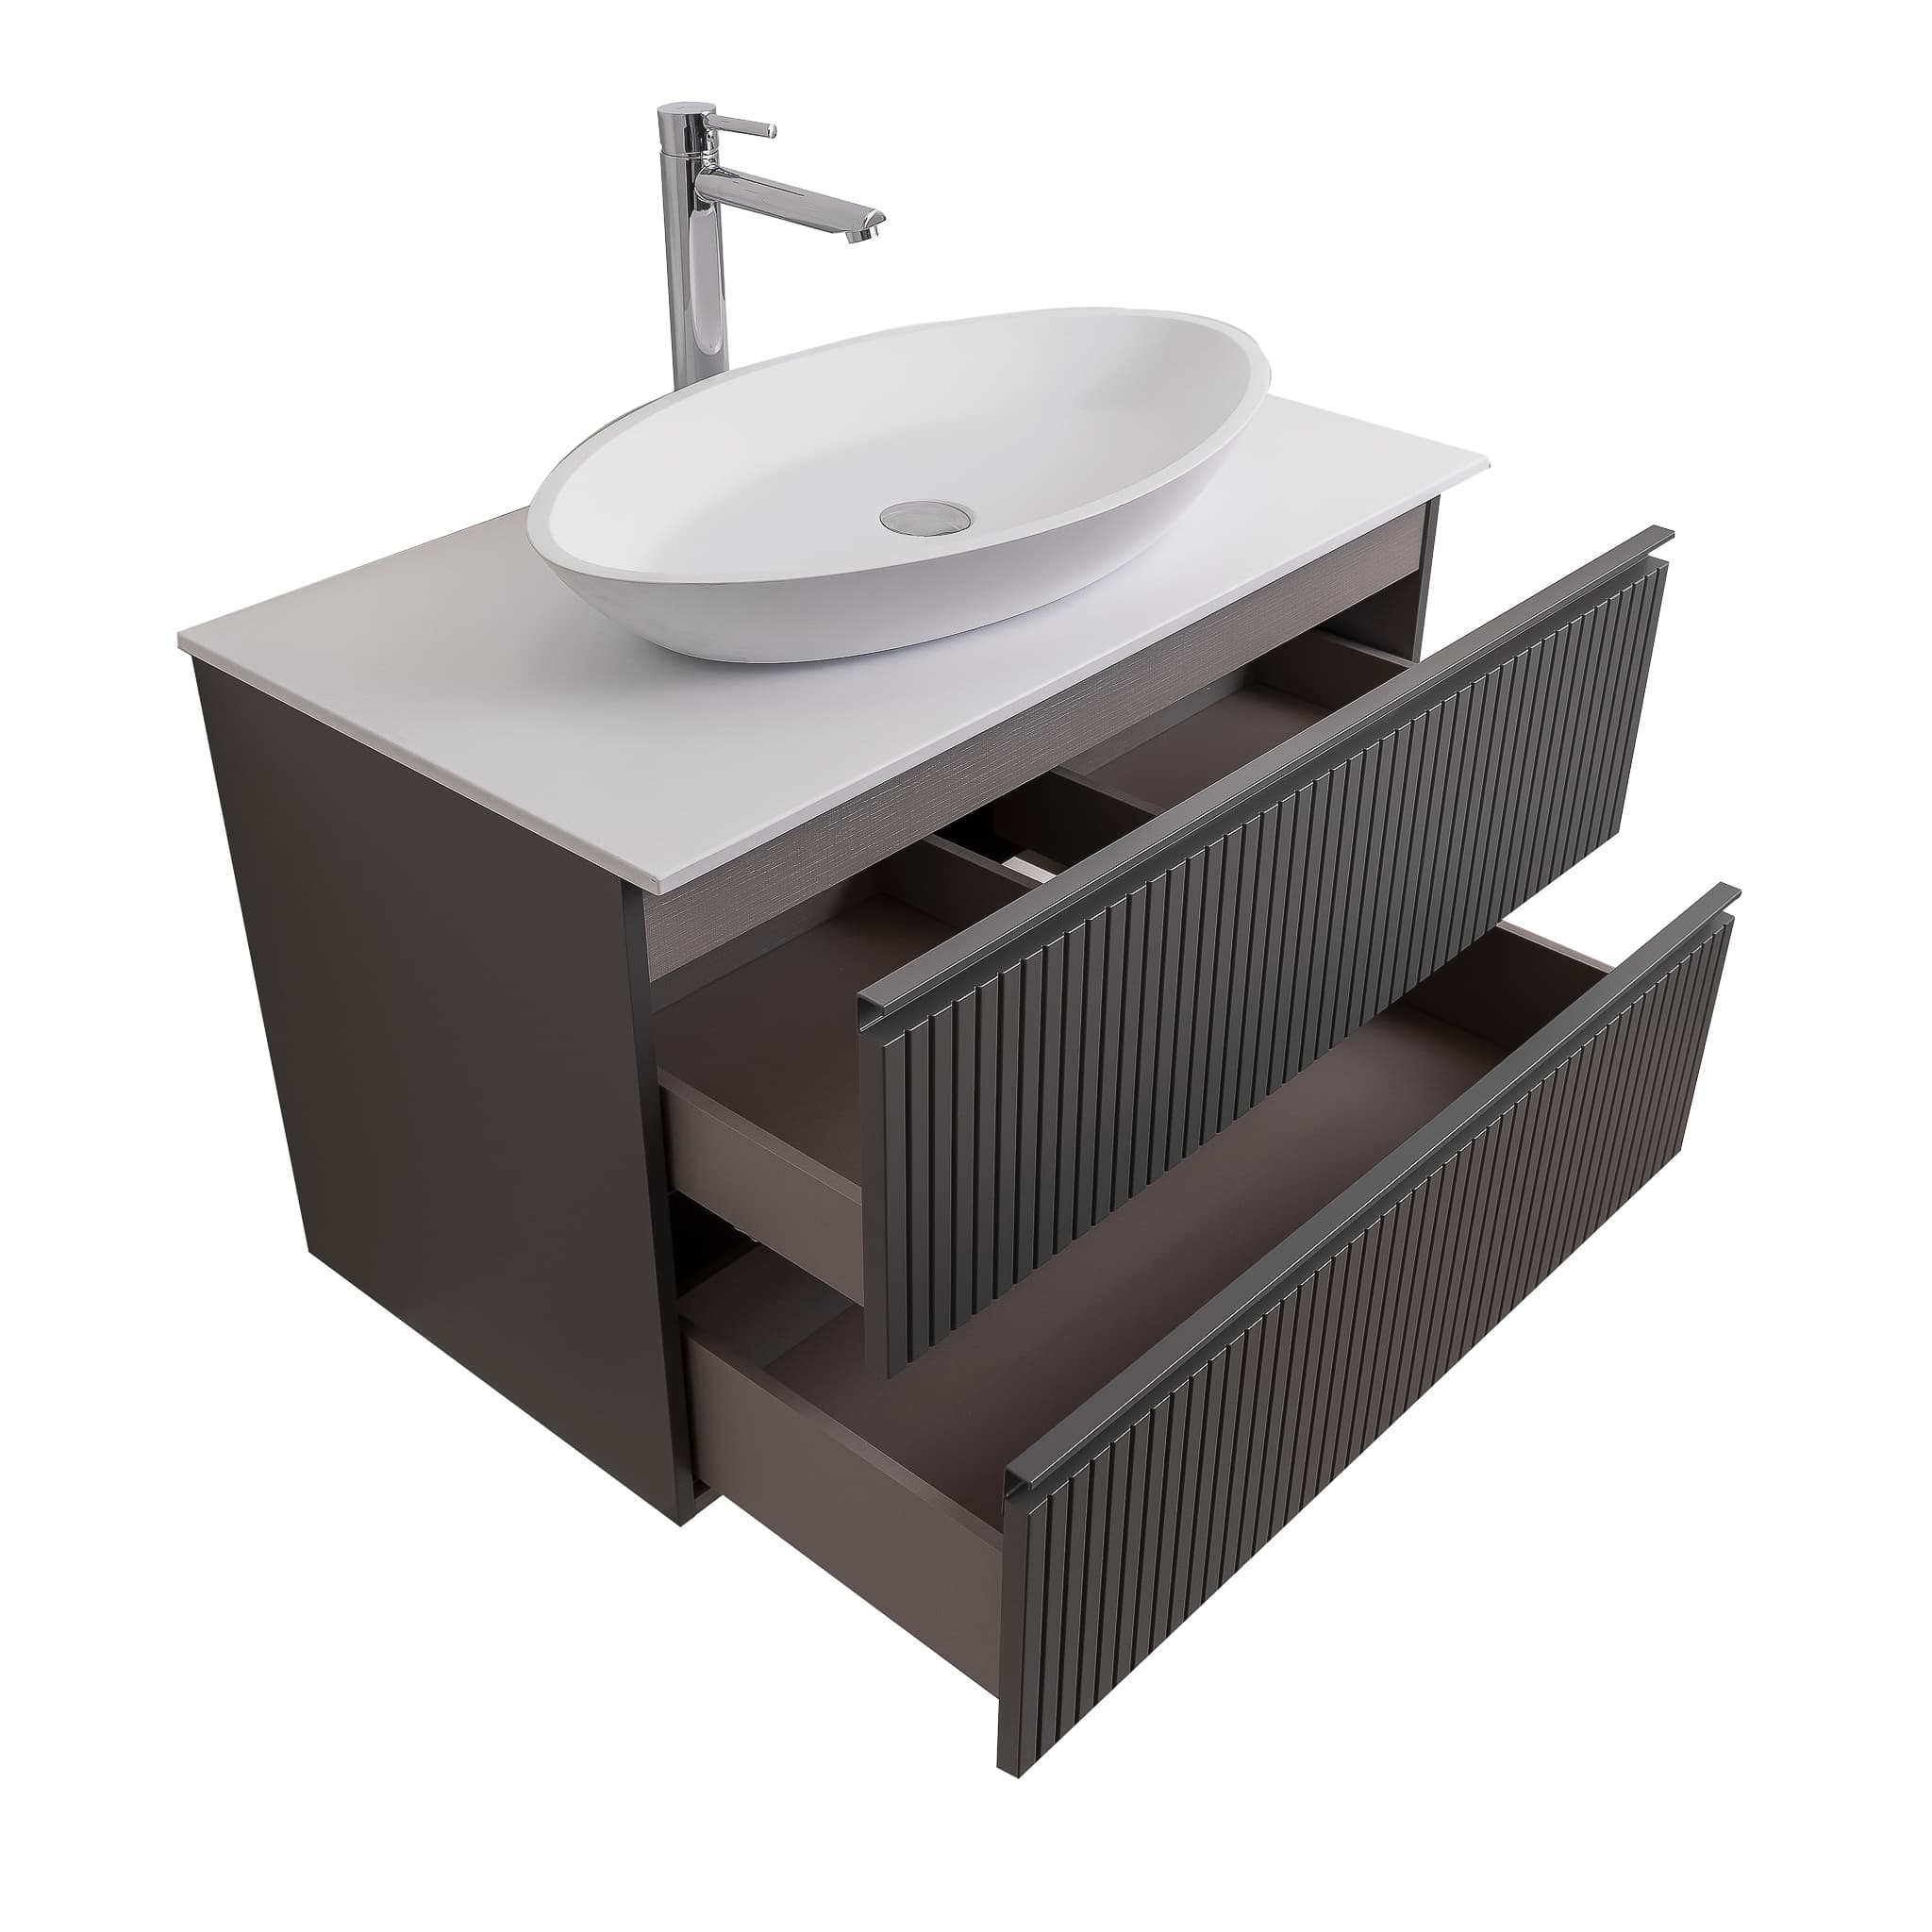 Ares 35.5 Matte Grey Cabinet, Solid Surface Flat White Counter And Oval Solid Surface White Basin 1305, Wall Mounted Modern Vanity Set